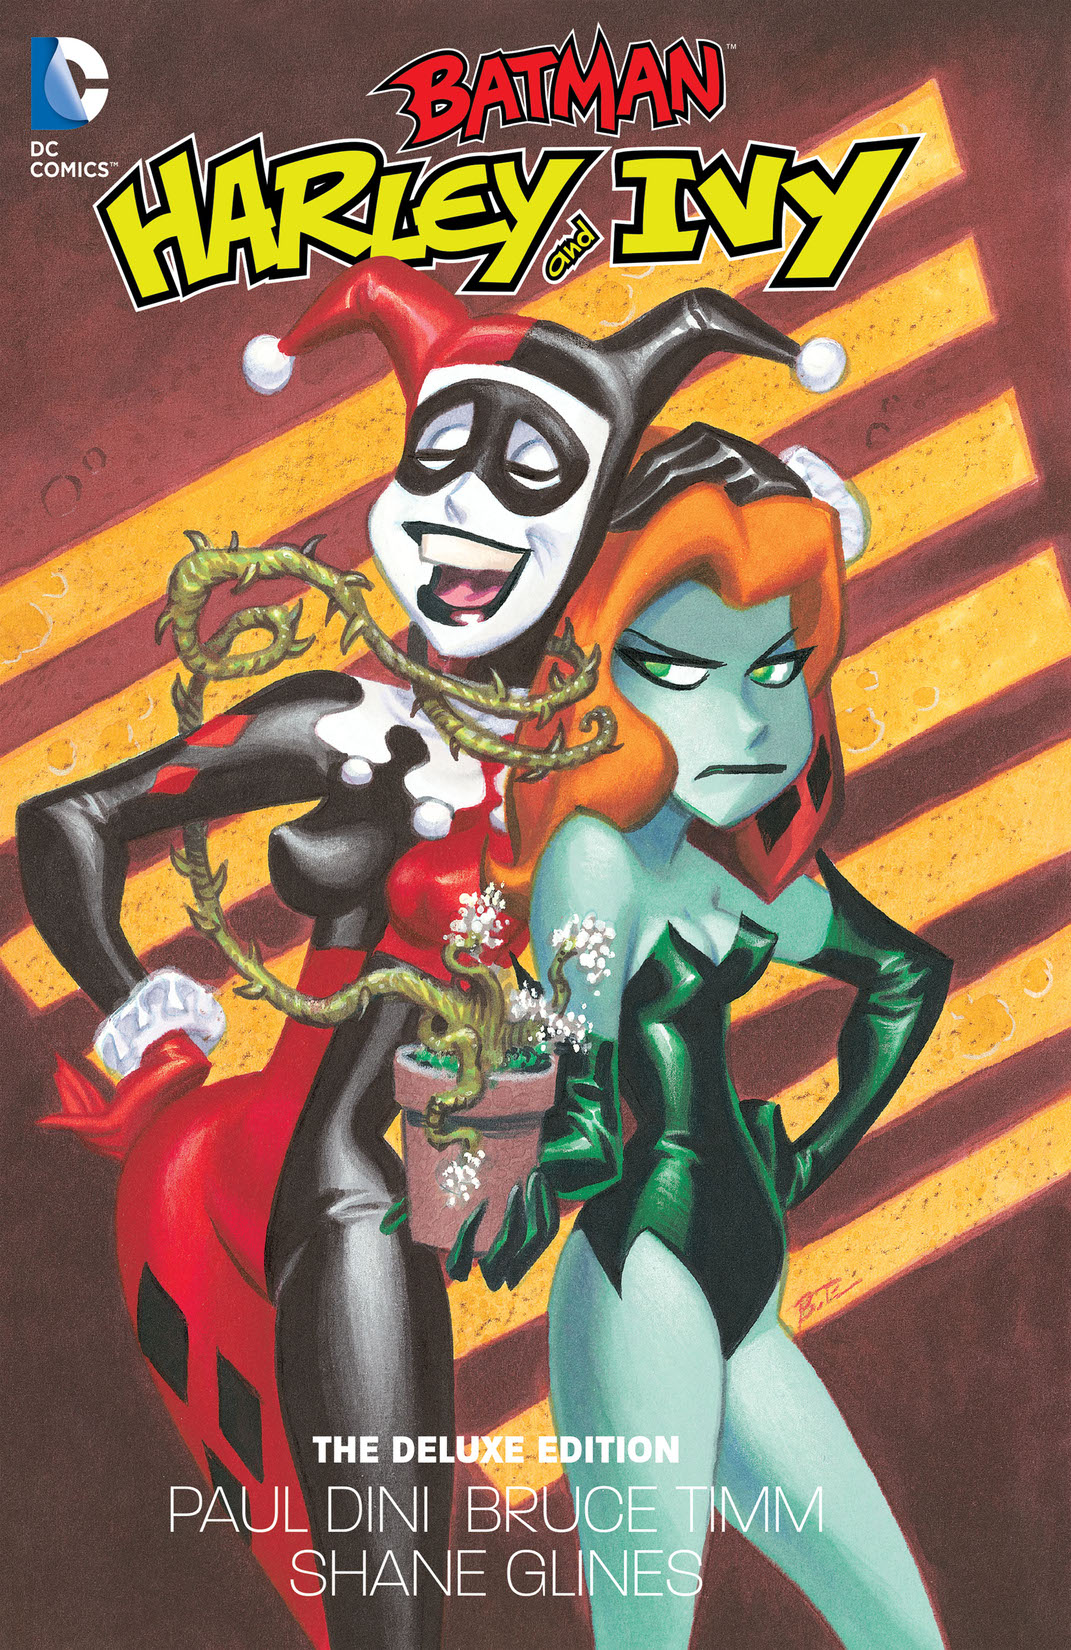 Batman: Harley and Ivy: The Deluxe Edition preview images